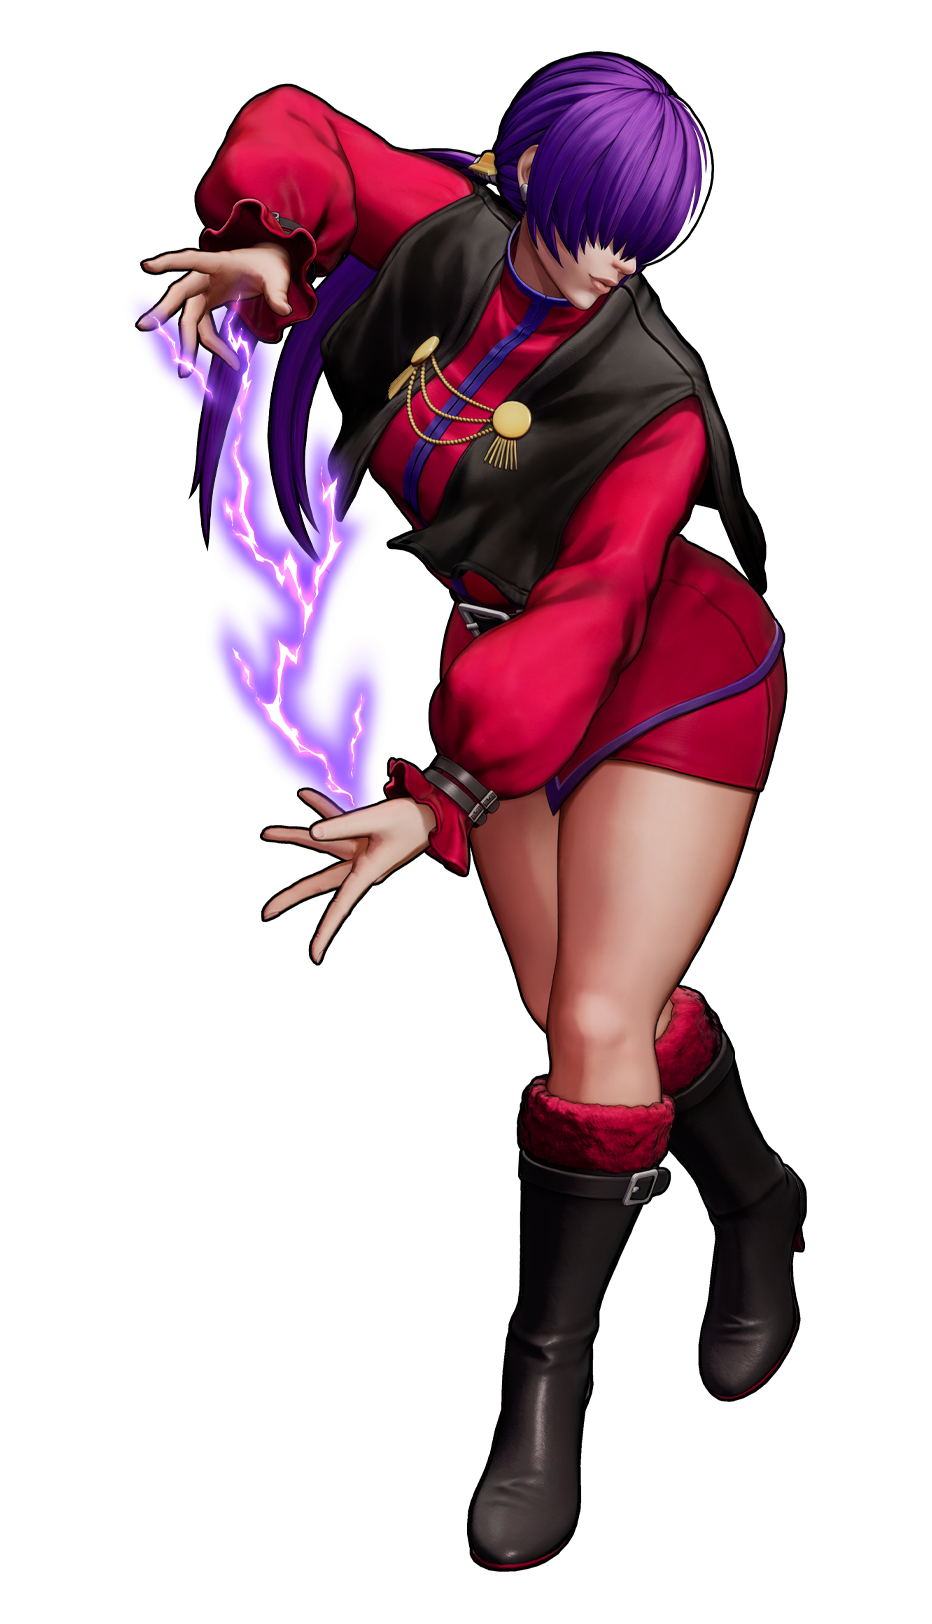 OROCHI SHERMIE | THE KING OF FIGHTERS XV